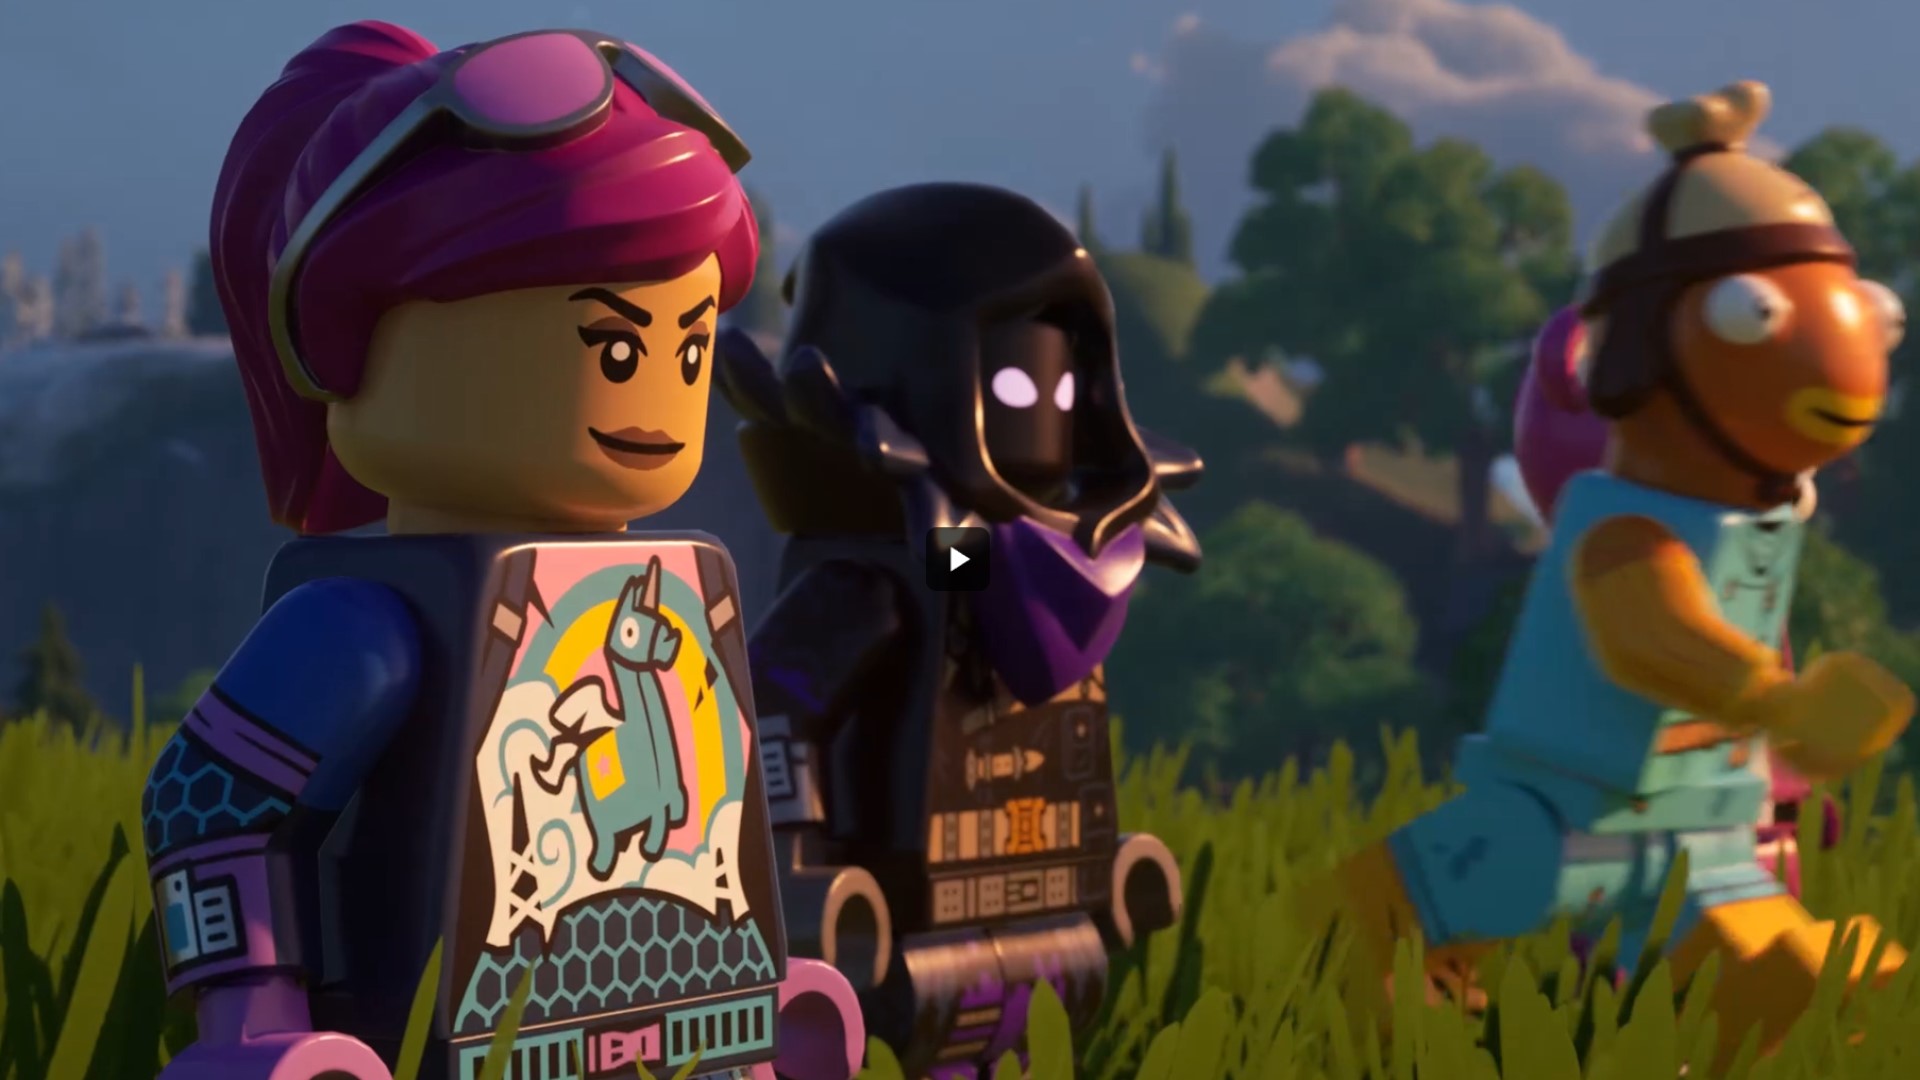 Epic reassures Fortnite fans that new Lego Rocket Racing and